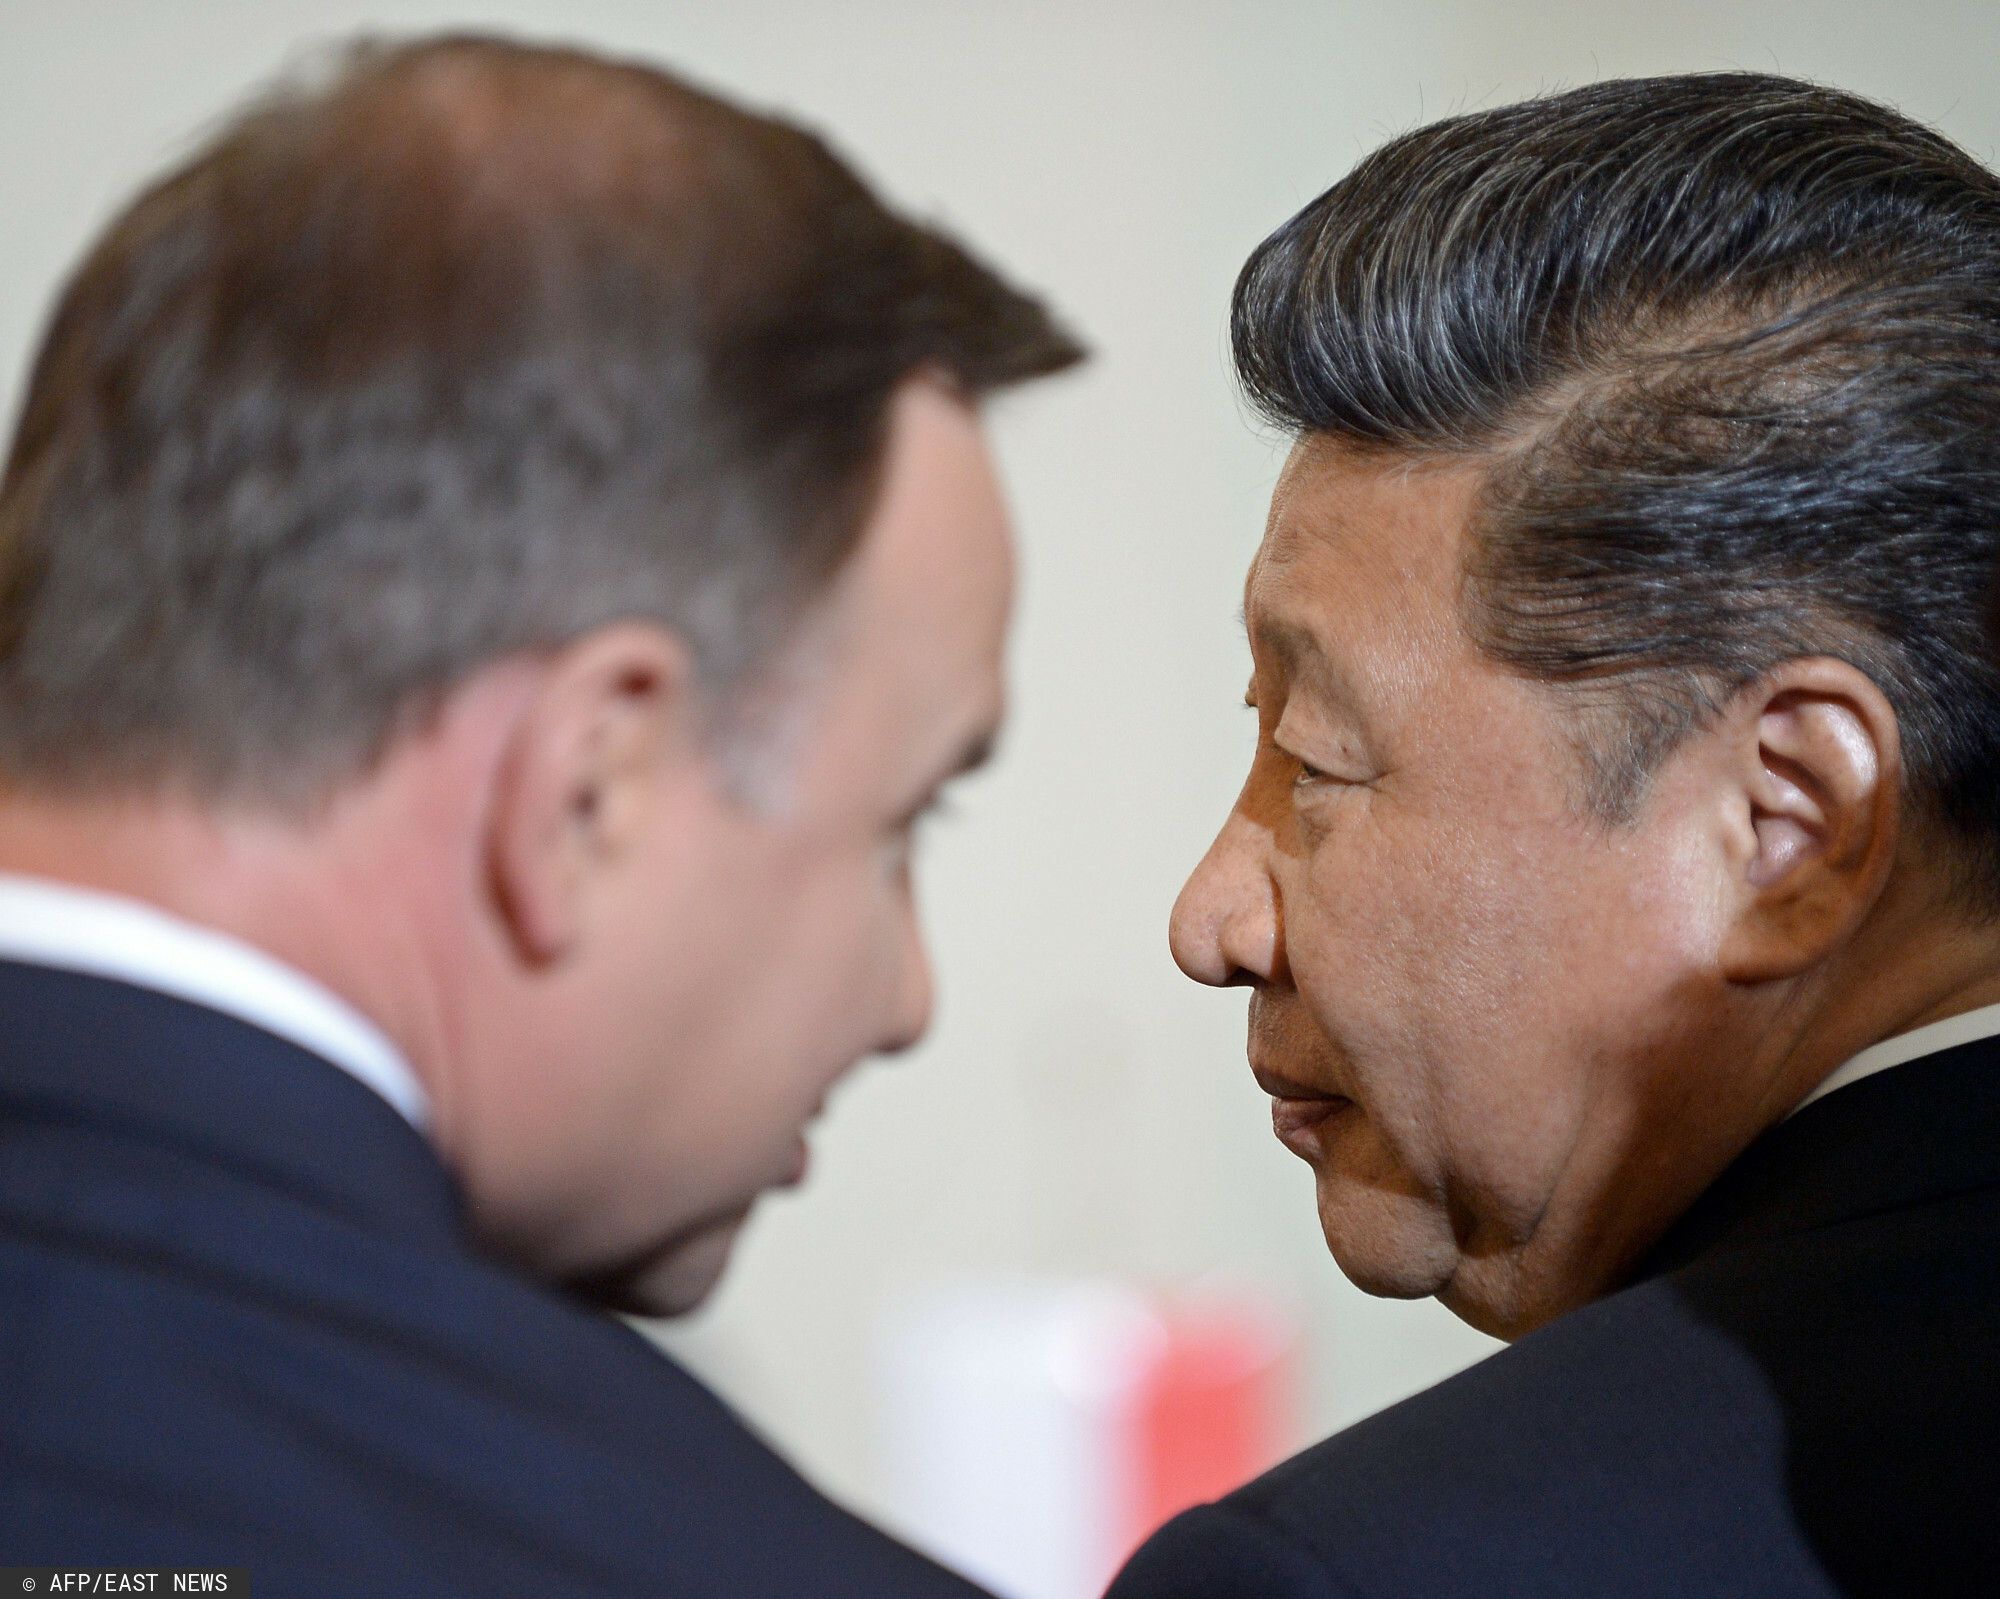 China's President Xi Jinping (R) talks to his Polish counterpart Andrzej Duda on June 20, 2016 at the presidential palace in Warsaw